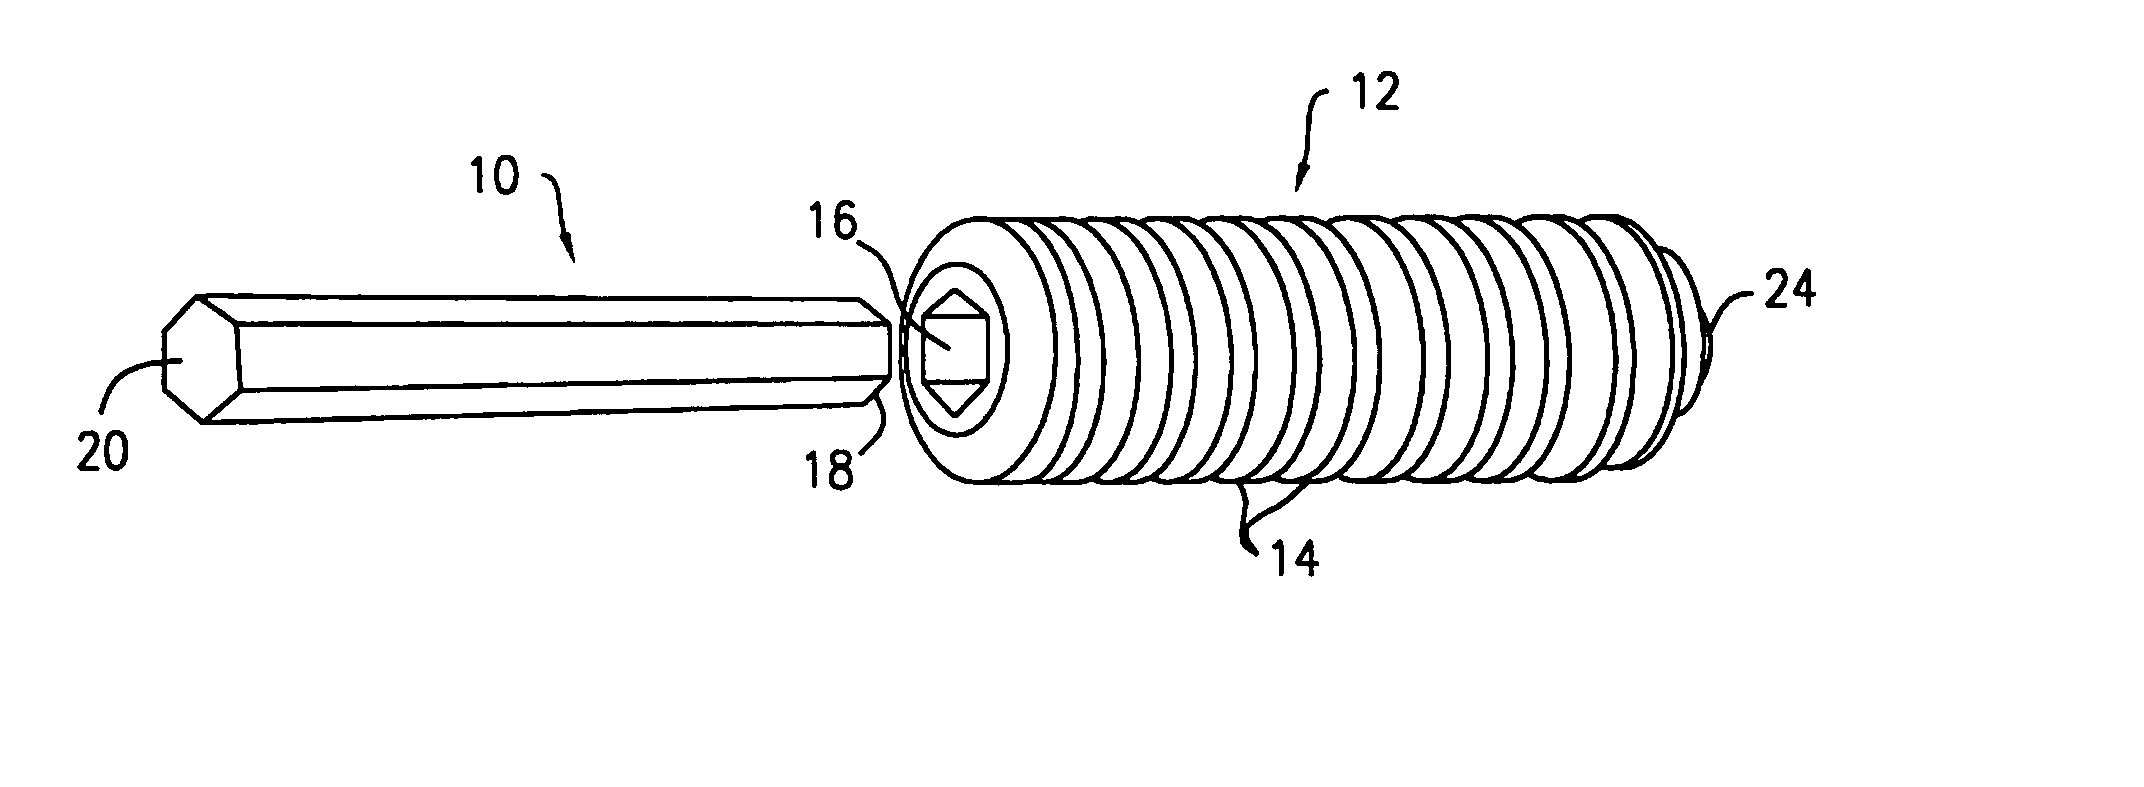 Polymer-based orthopedic screw and driver system with increased insertion torque tolerance and associated method for making and using same